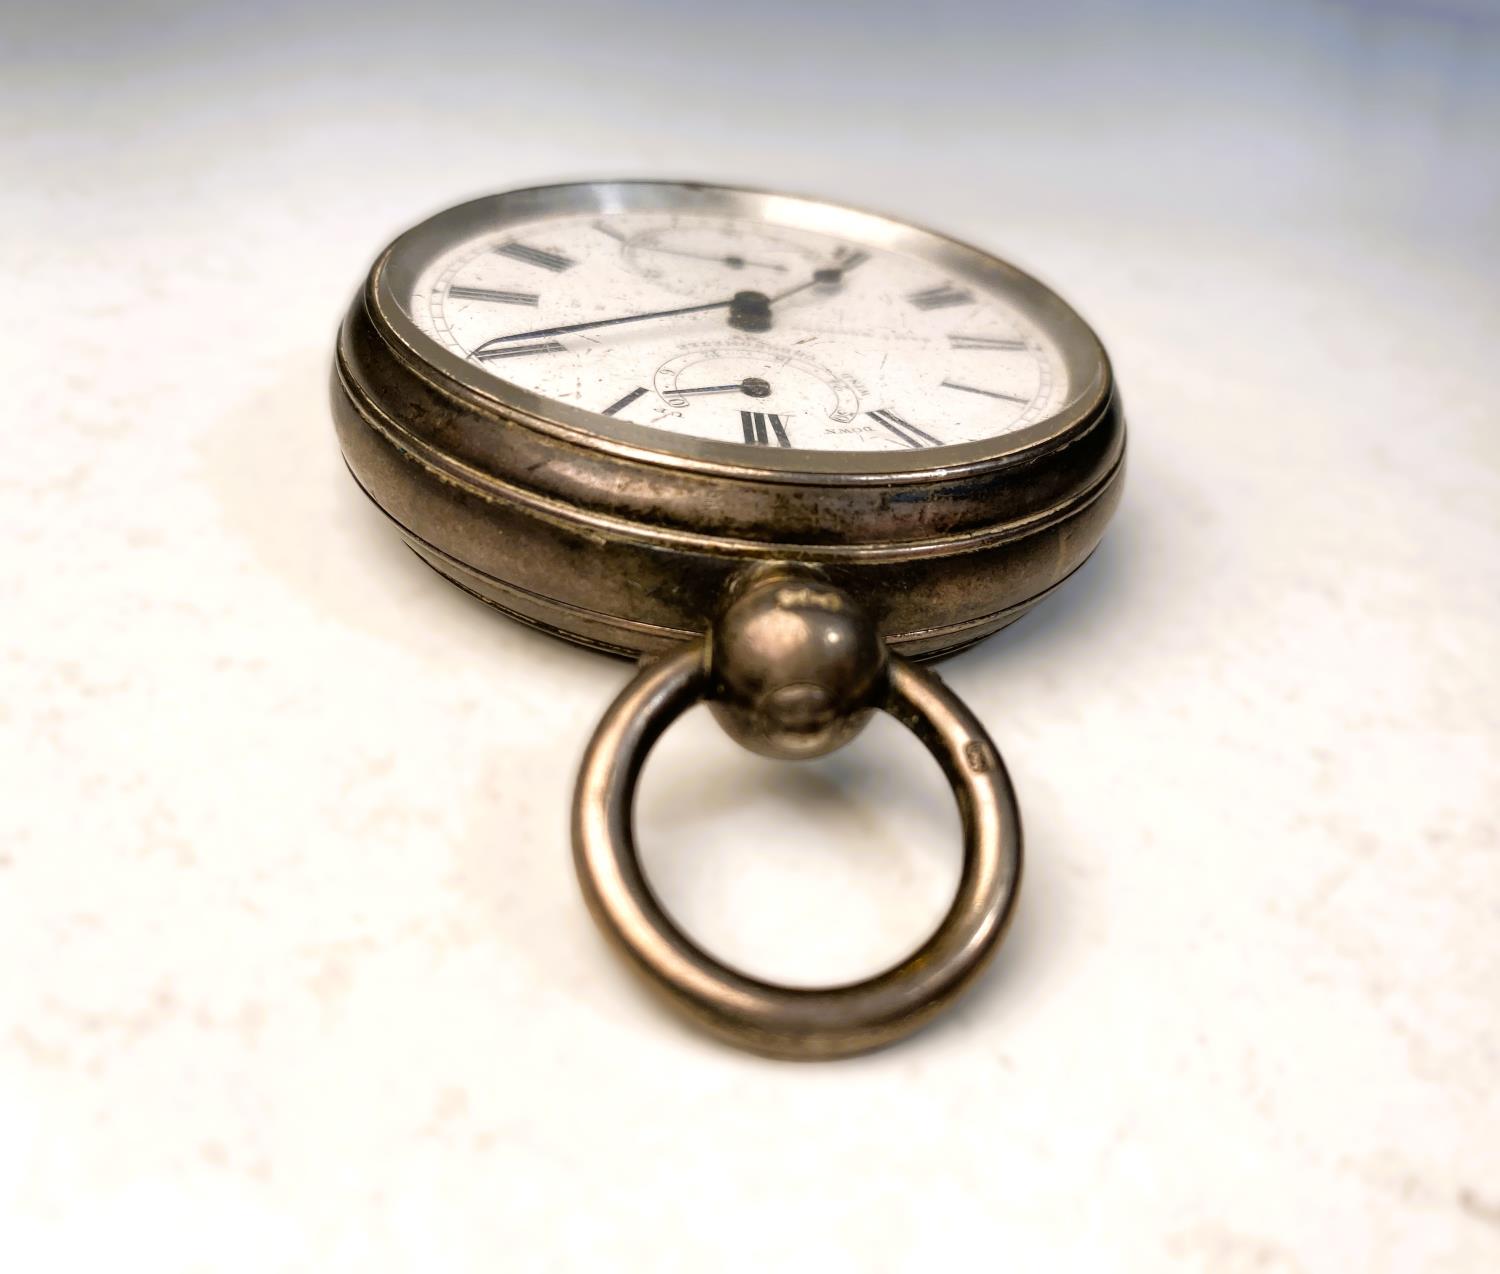 An open faced key wound gent's silver cased chronometer / pocket watch by Sam Wooton, London - Image 4 of 5